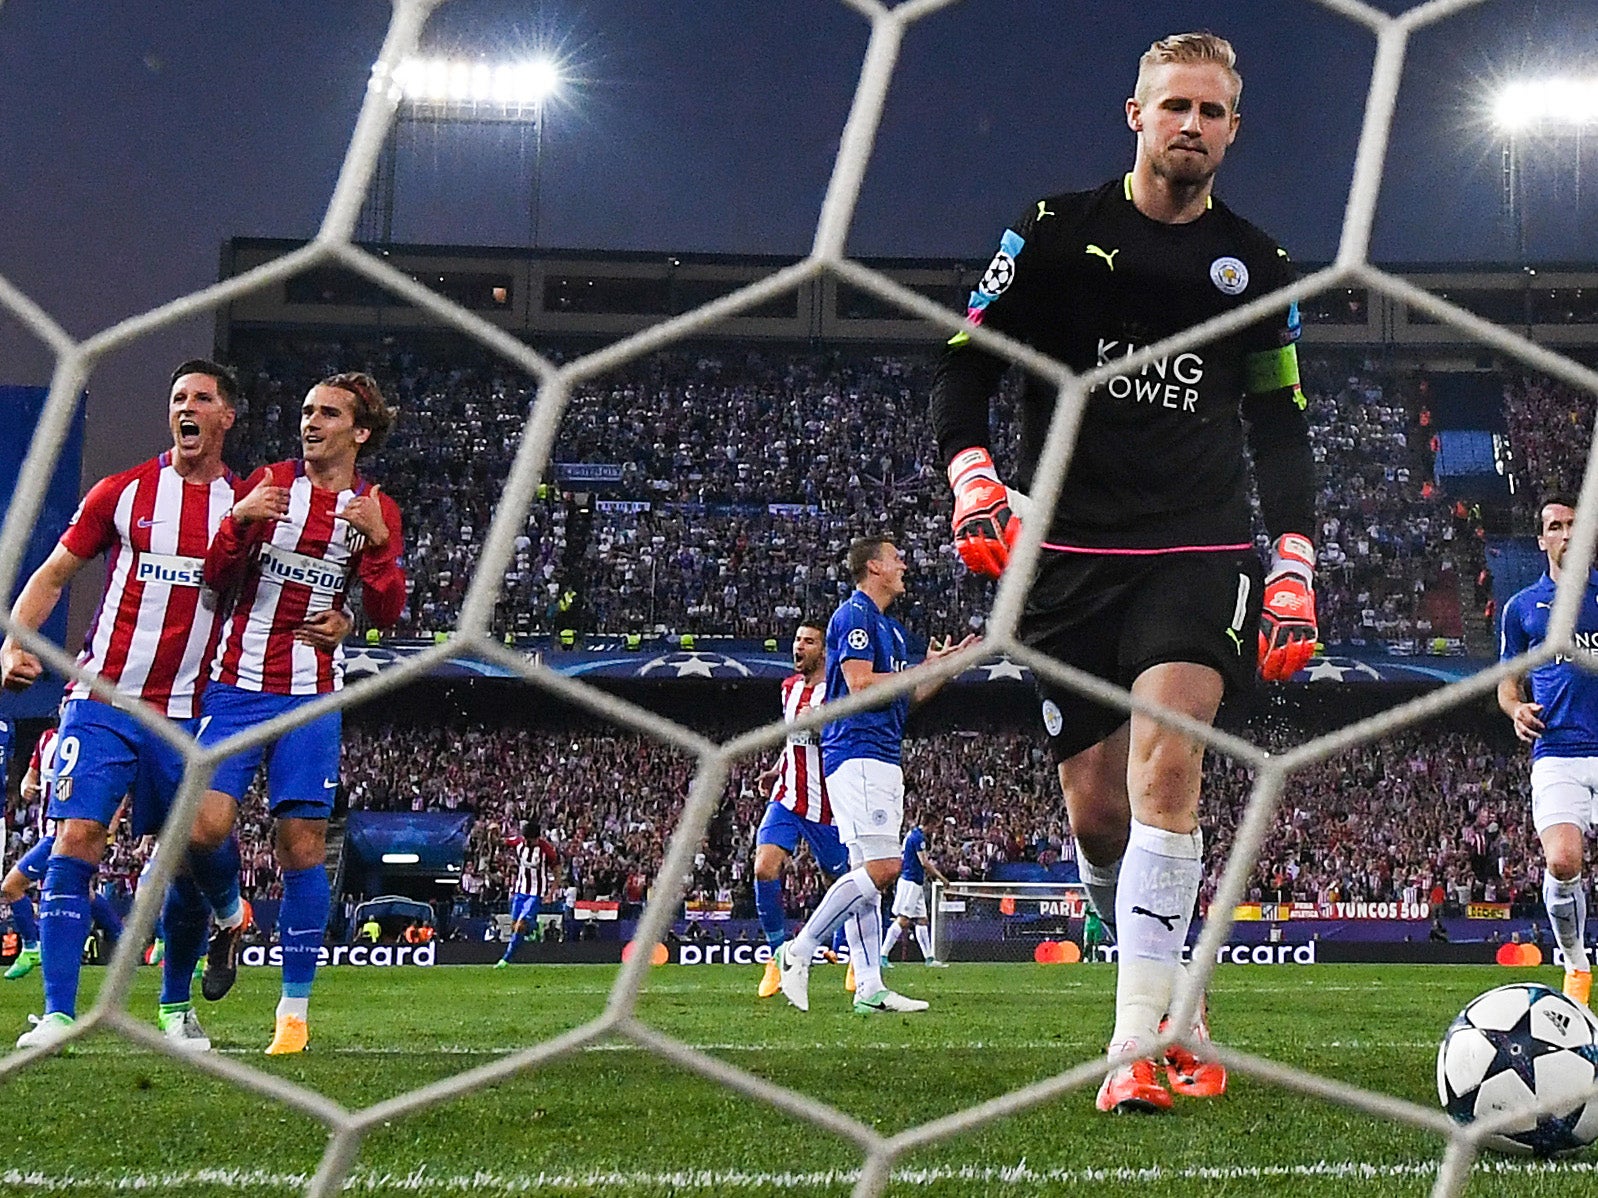 Schmeichel refused to publicly criticise the penalty decision